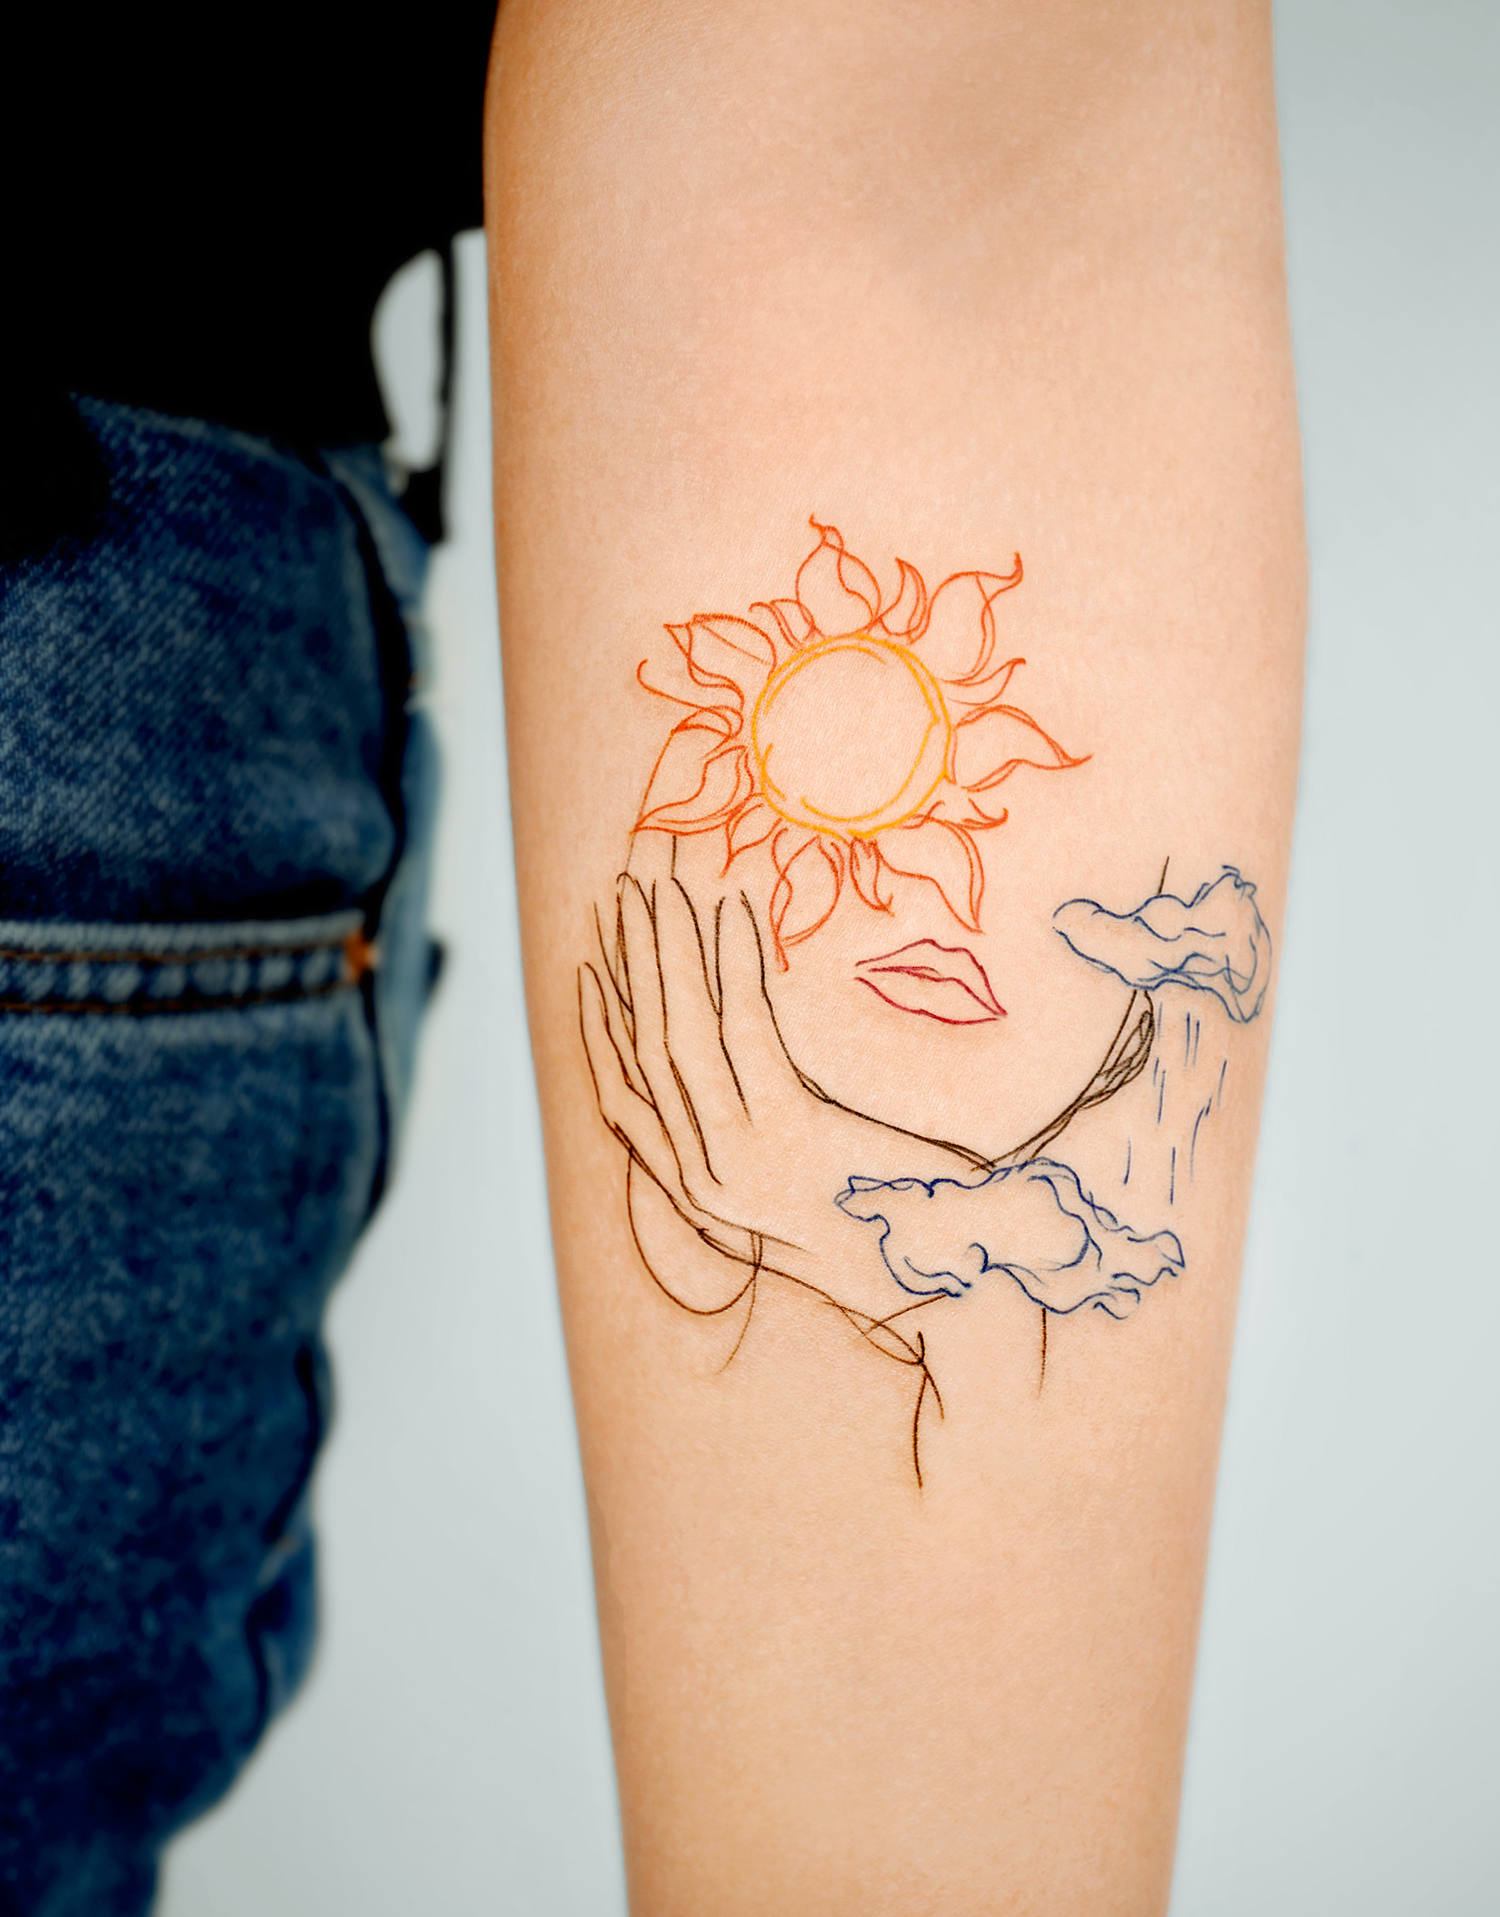 Additionally the artist integrates color in his fineline tattoos